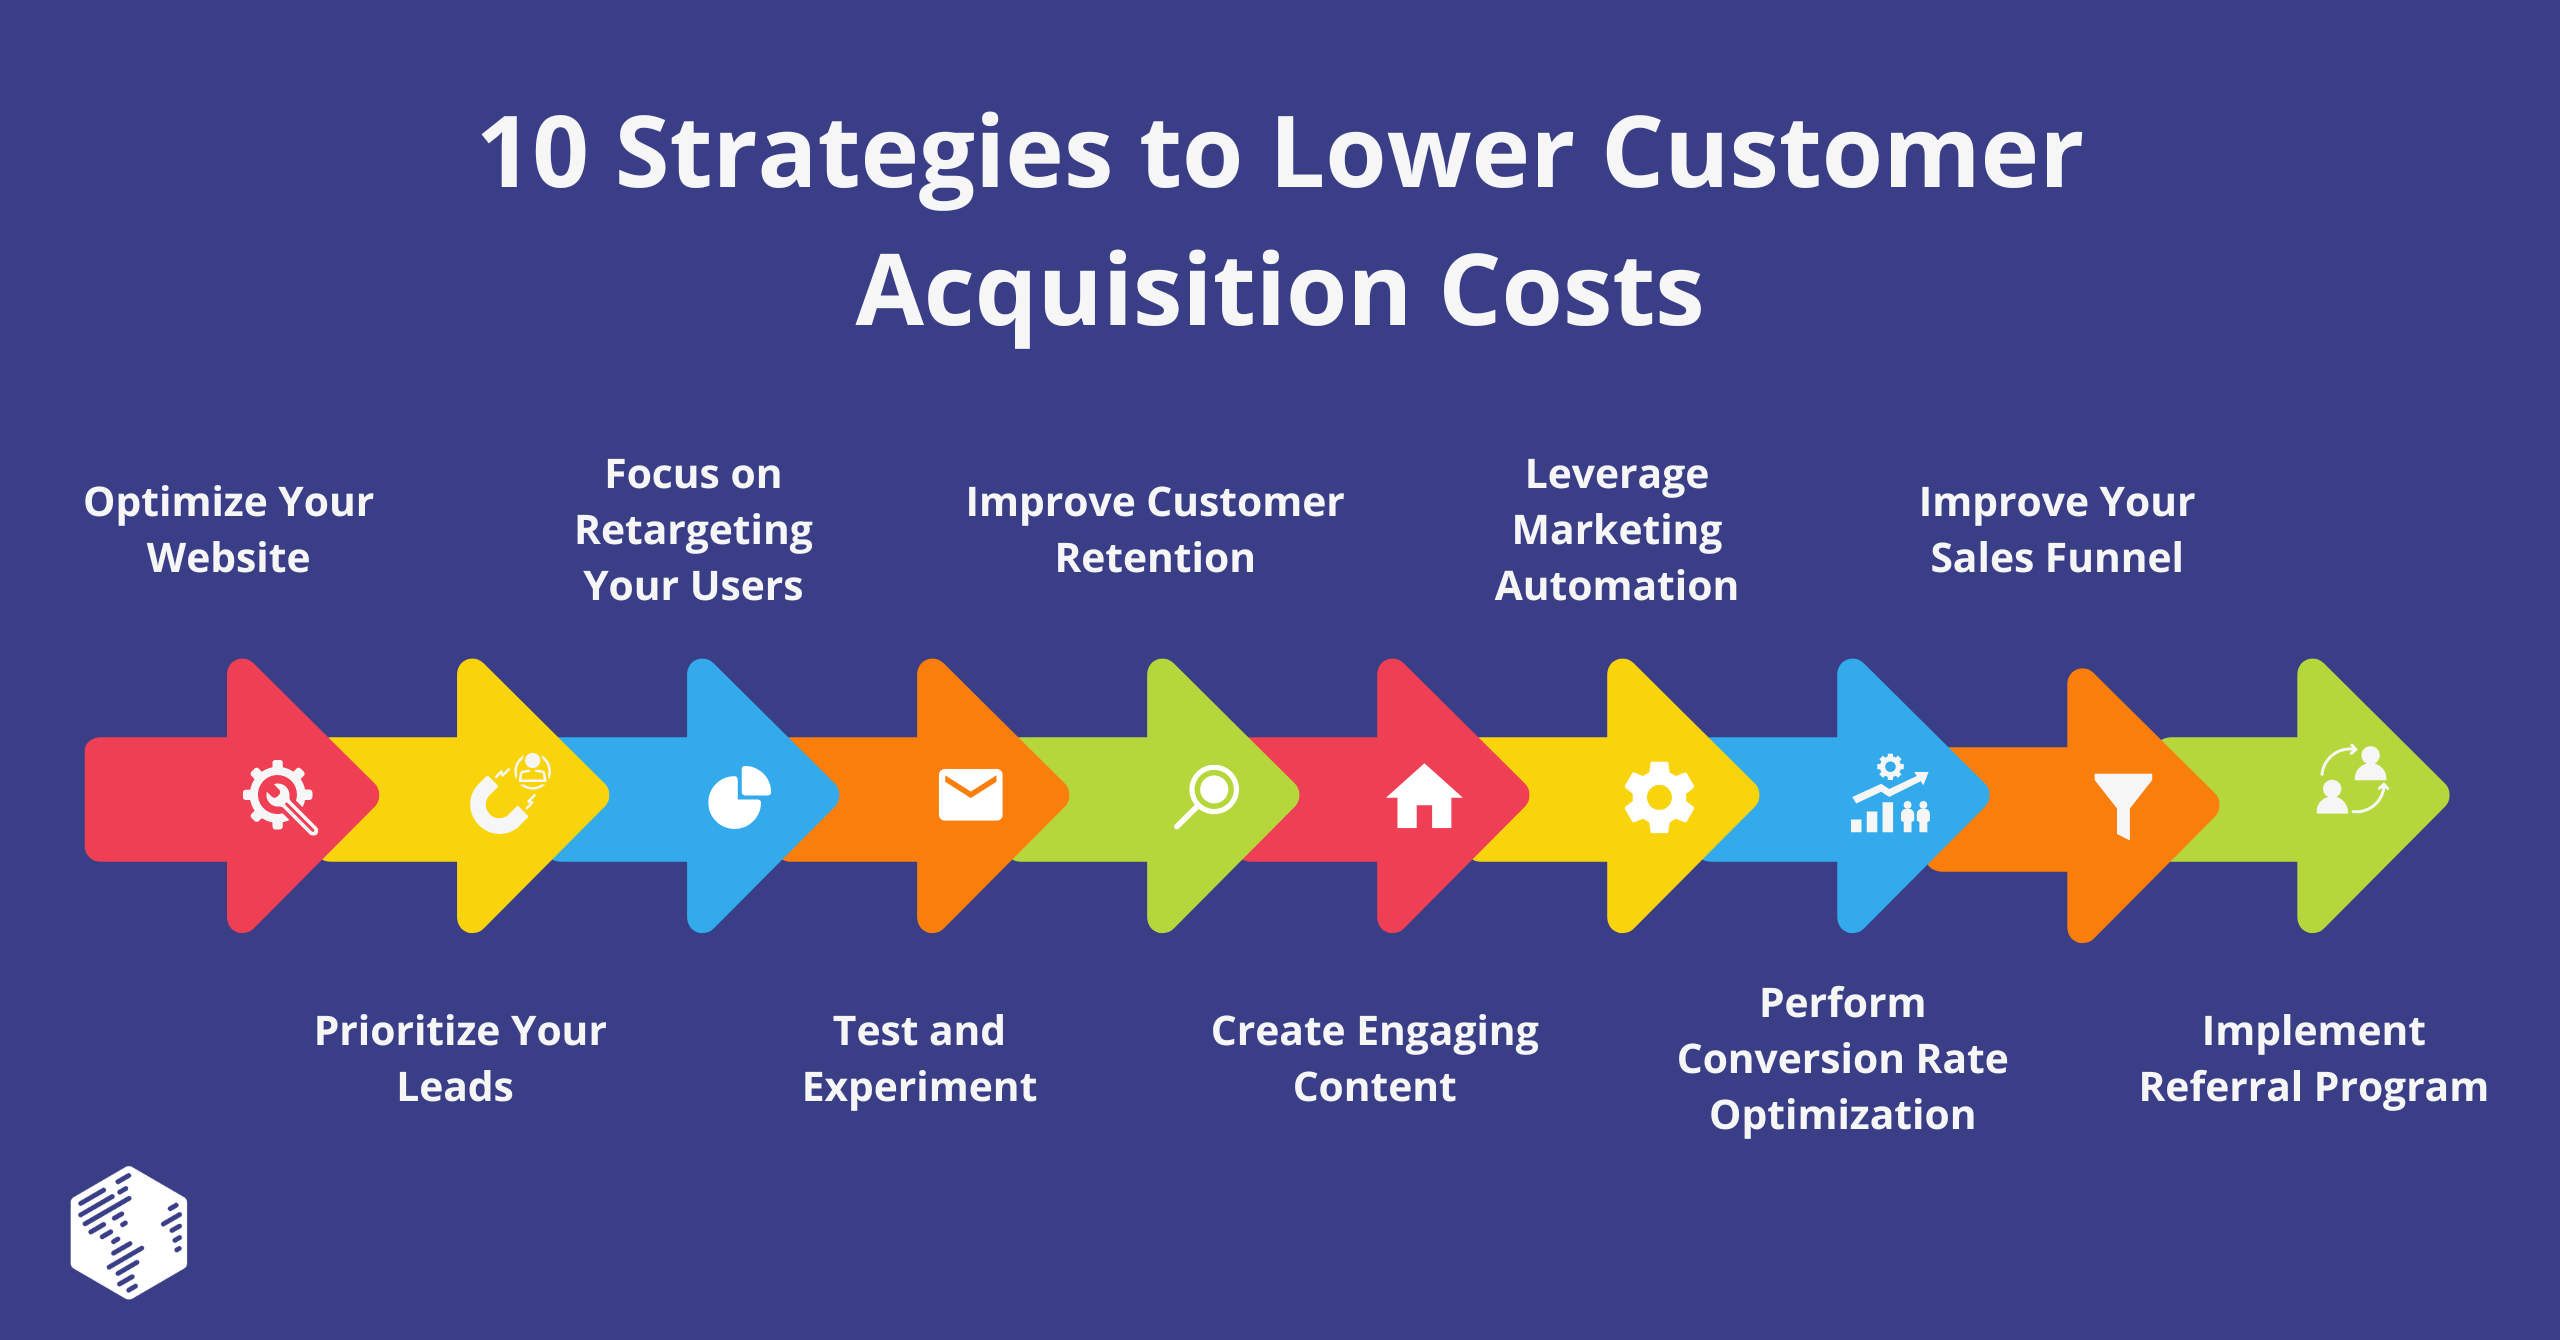 Strategies to Lower Customer Acquisition Costs 